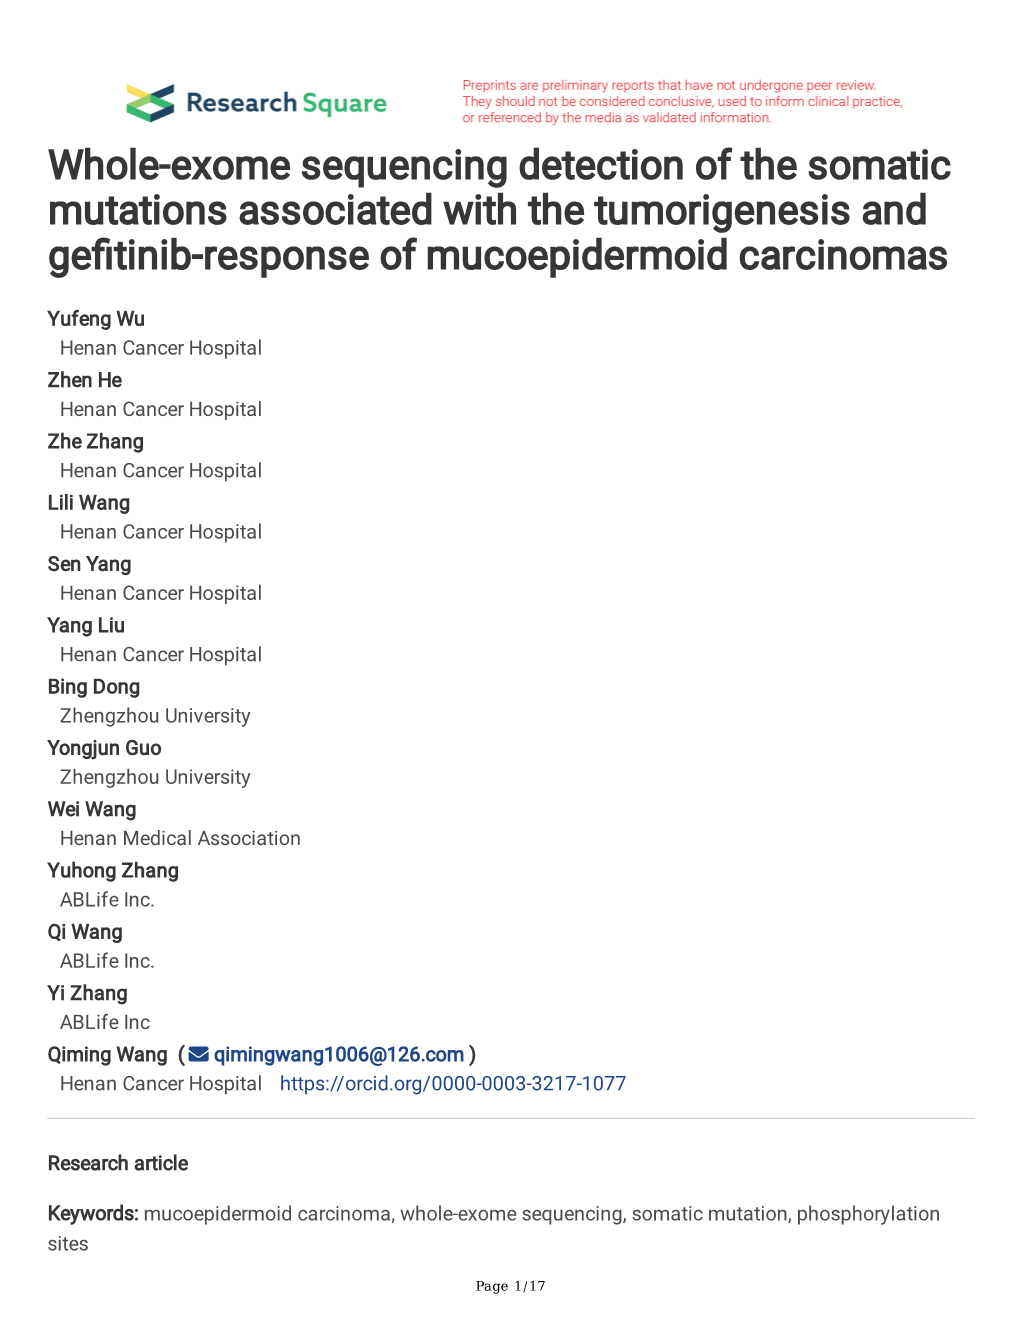 Whole-Exome Sequencing Detection of the Somatic Mutations Associated with the Tumorigenesis and Gefitinib-Response of Mucoepider